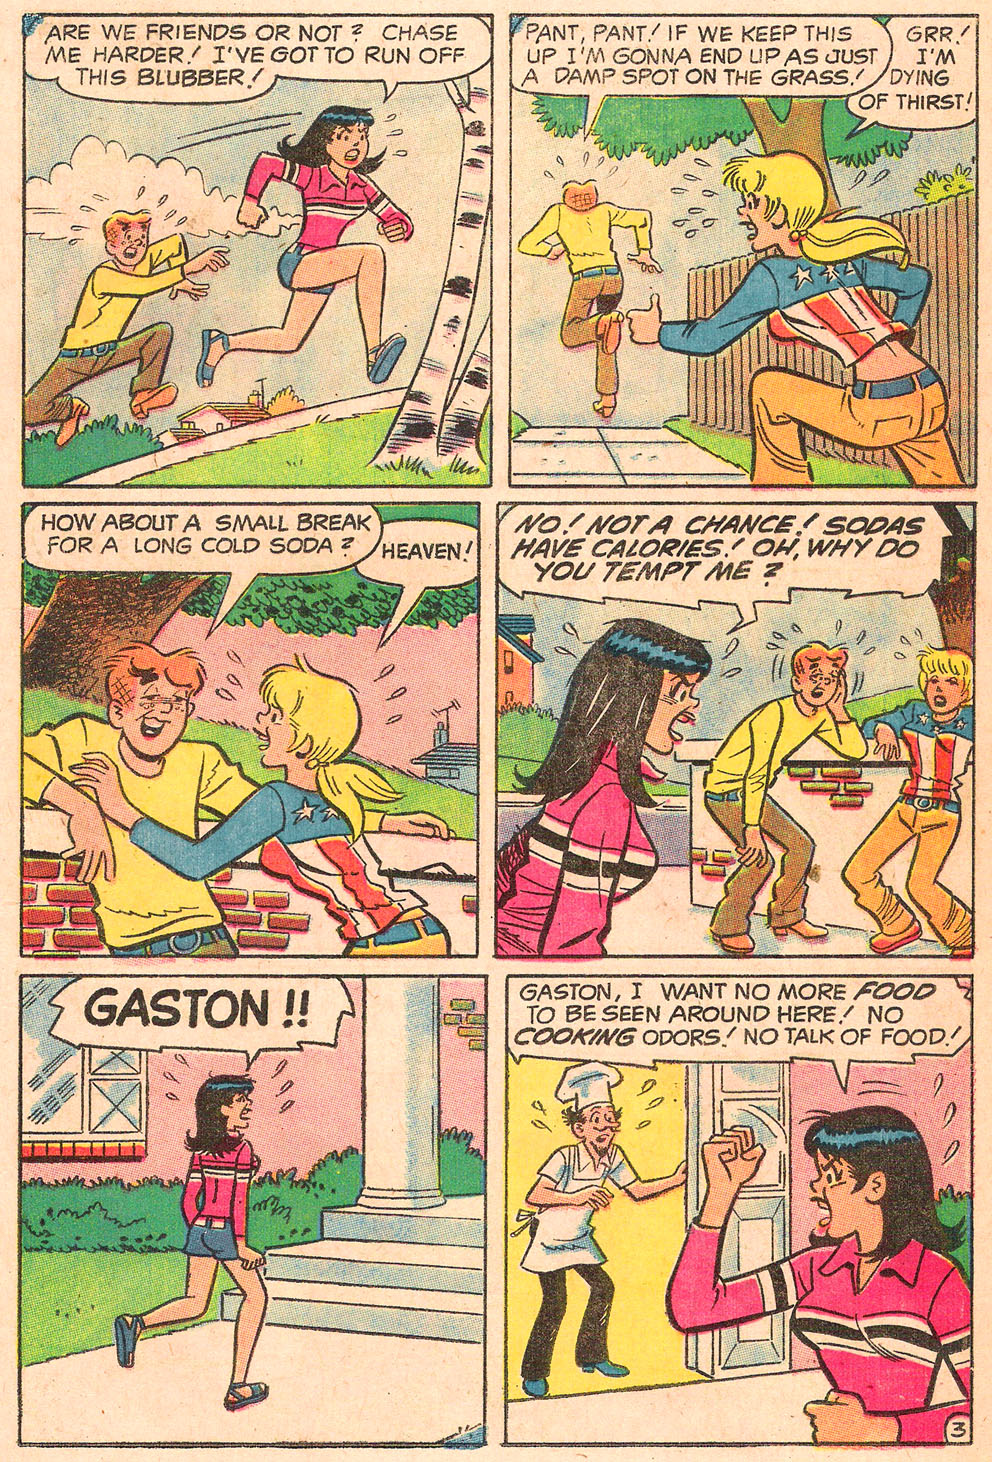 Read online Archie's Girls Betty and Veronica comic -  Issue #189 - 15